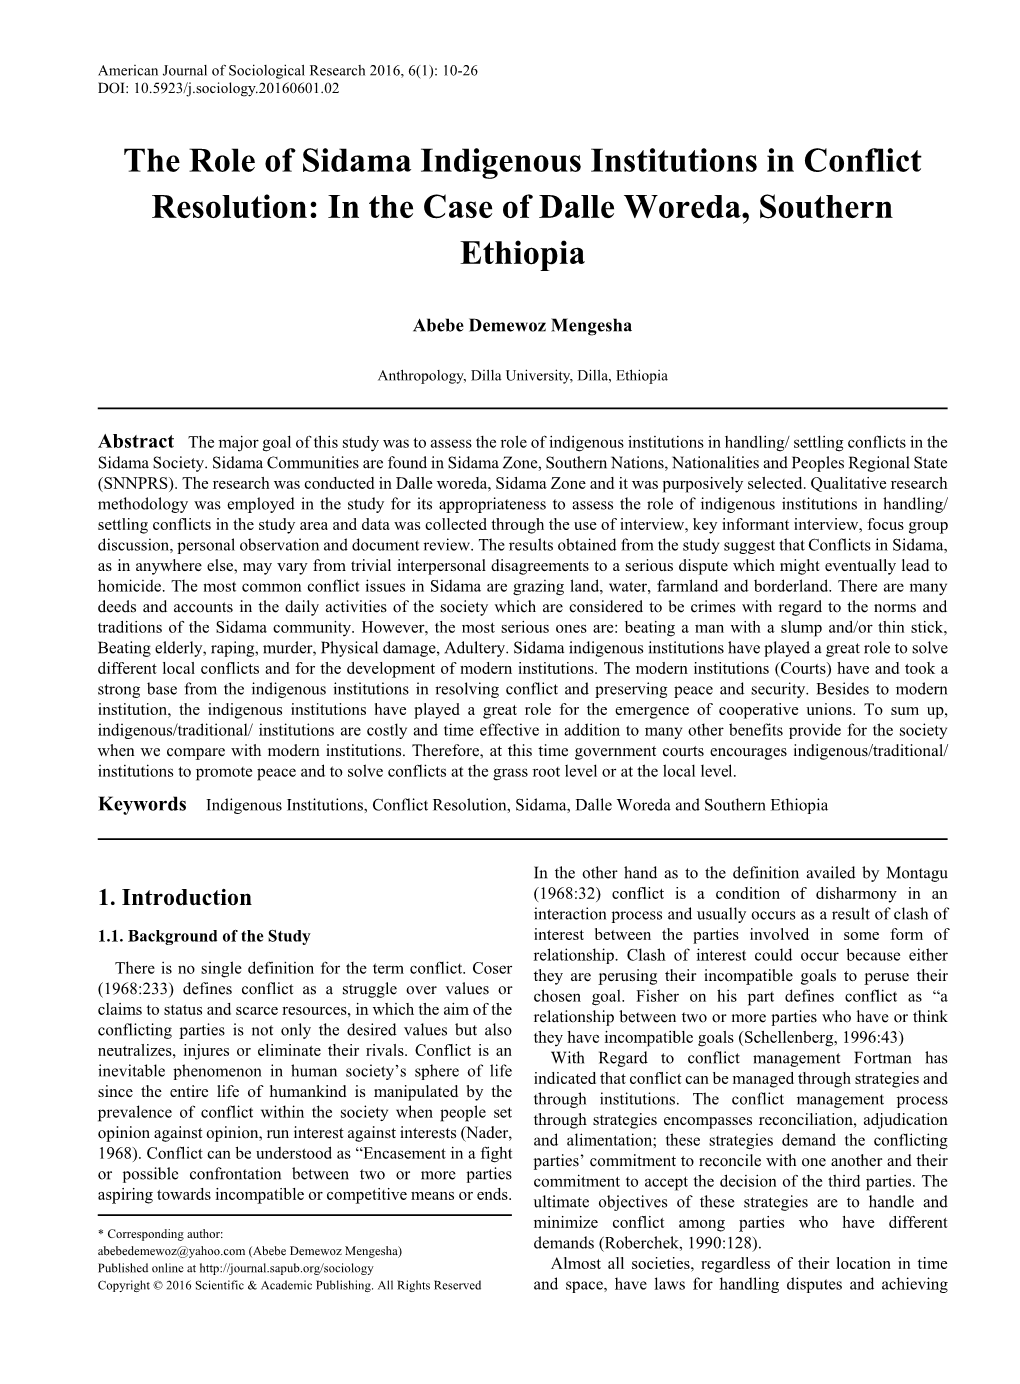 The Role of Sidama Indigenous Institutions in Conflict Resolution: in the Case of Dalle Woreda, Southern Ethiopia